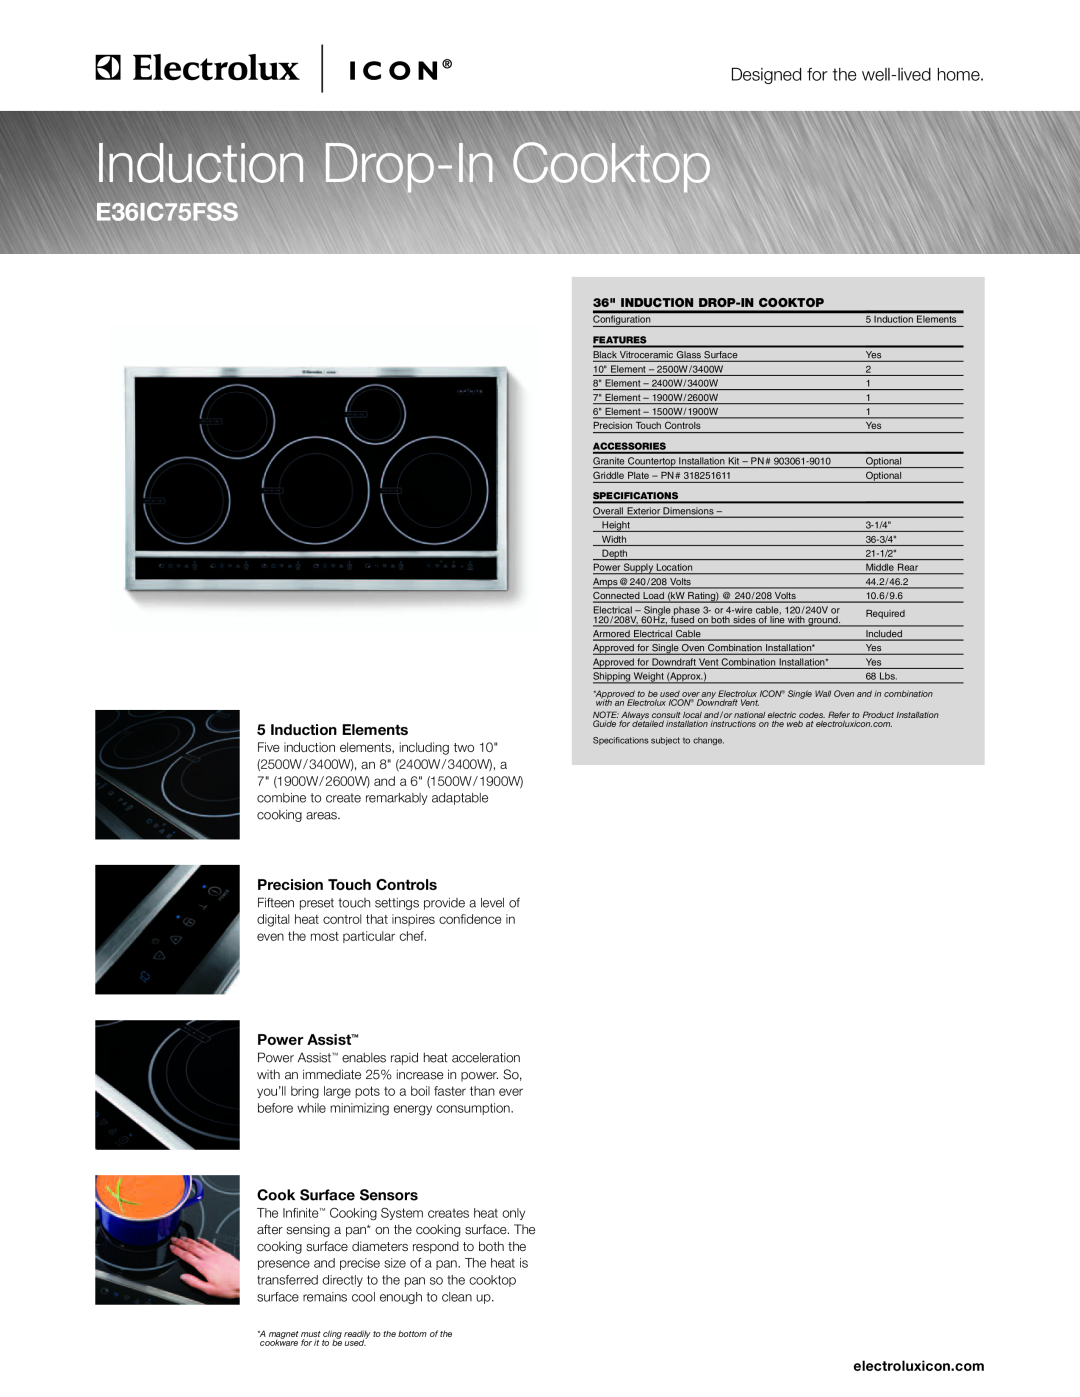 Electrolux E30GC70FSS, E30EC65ESS specifications Induction Drop-In Cooktop, E36IC75FSS, Designed for the well-lived home 